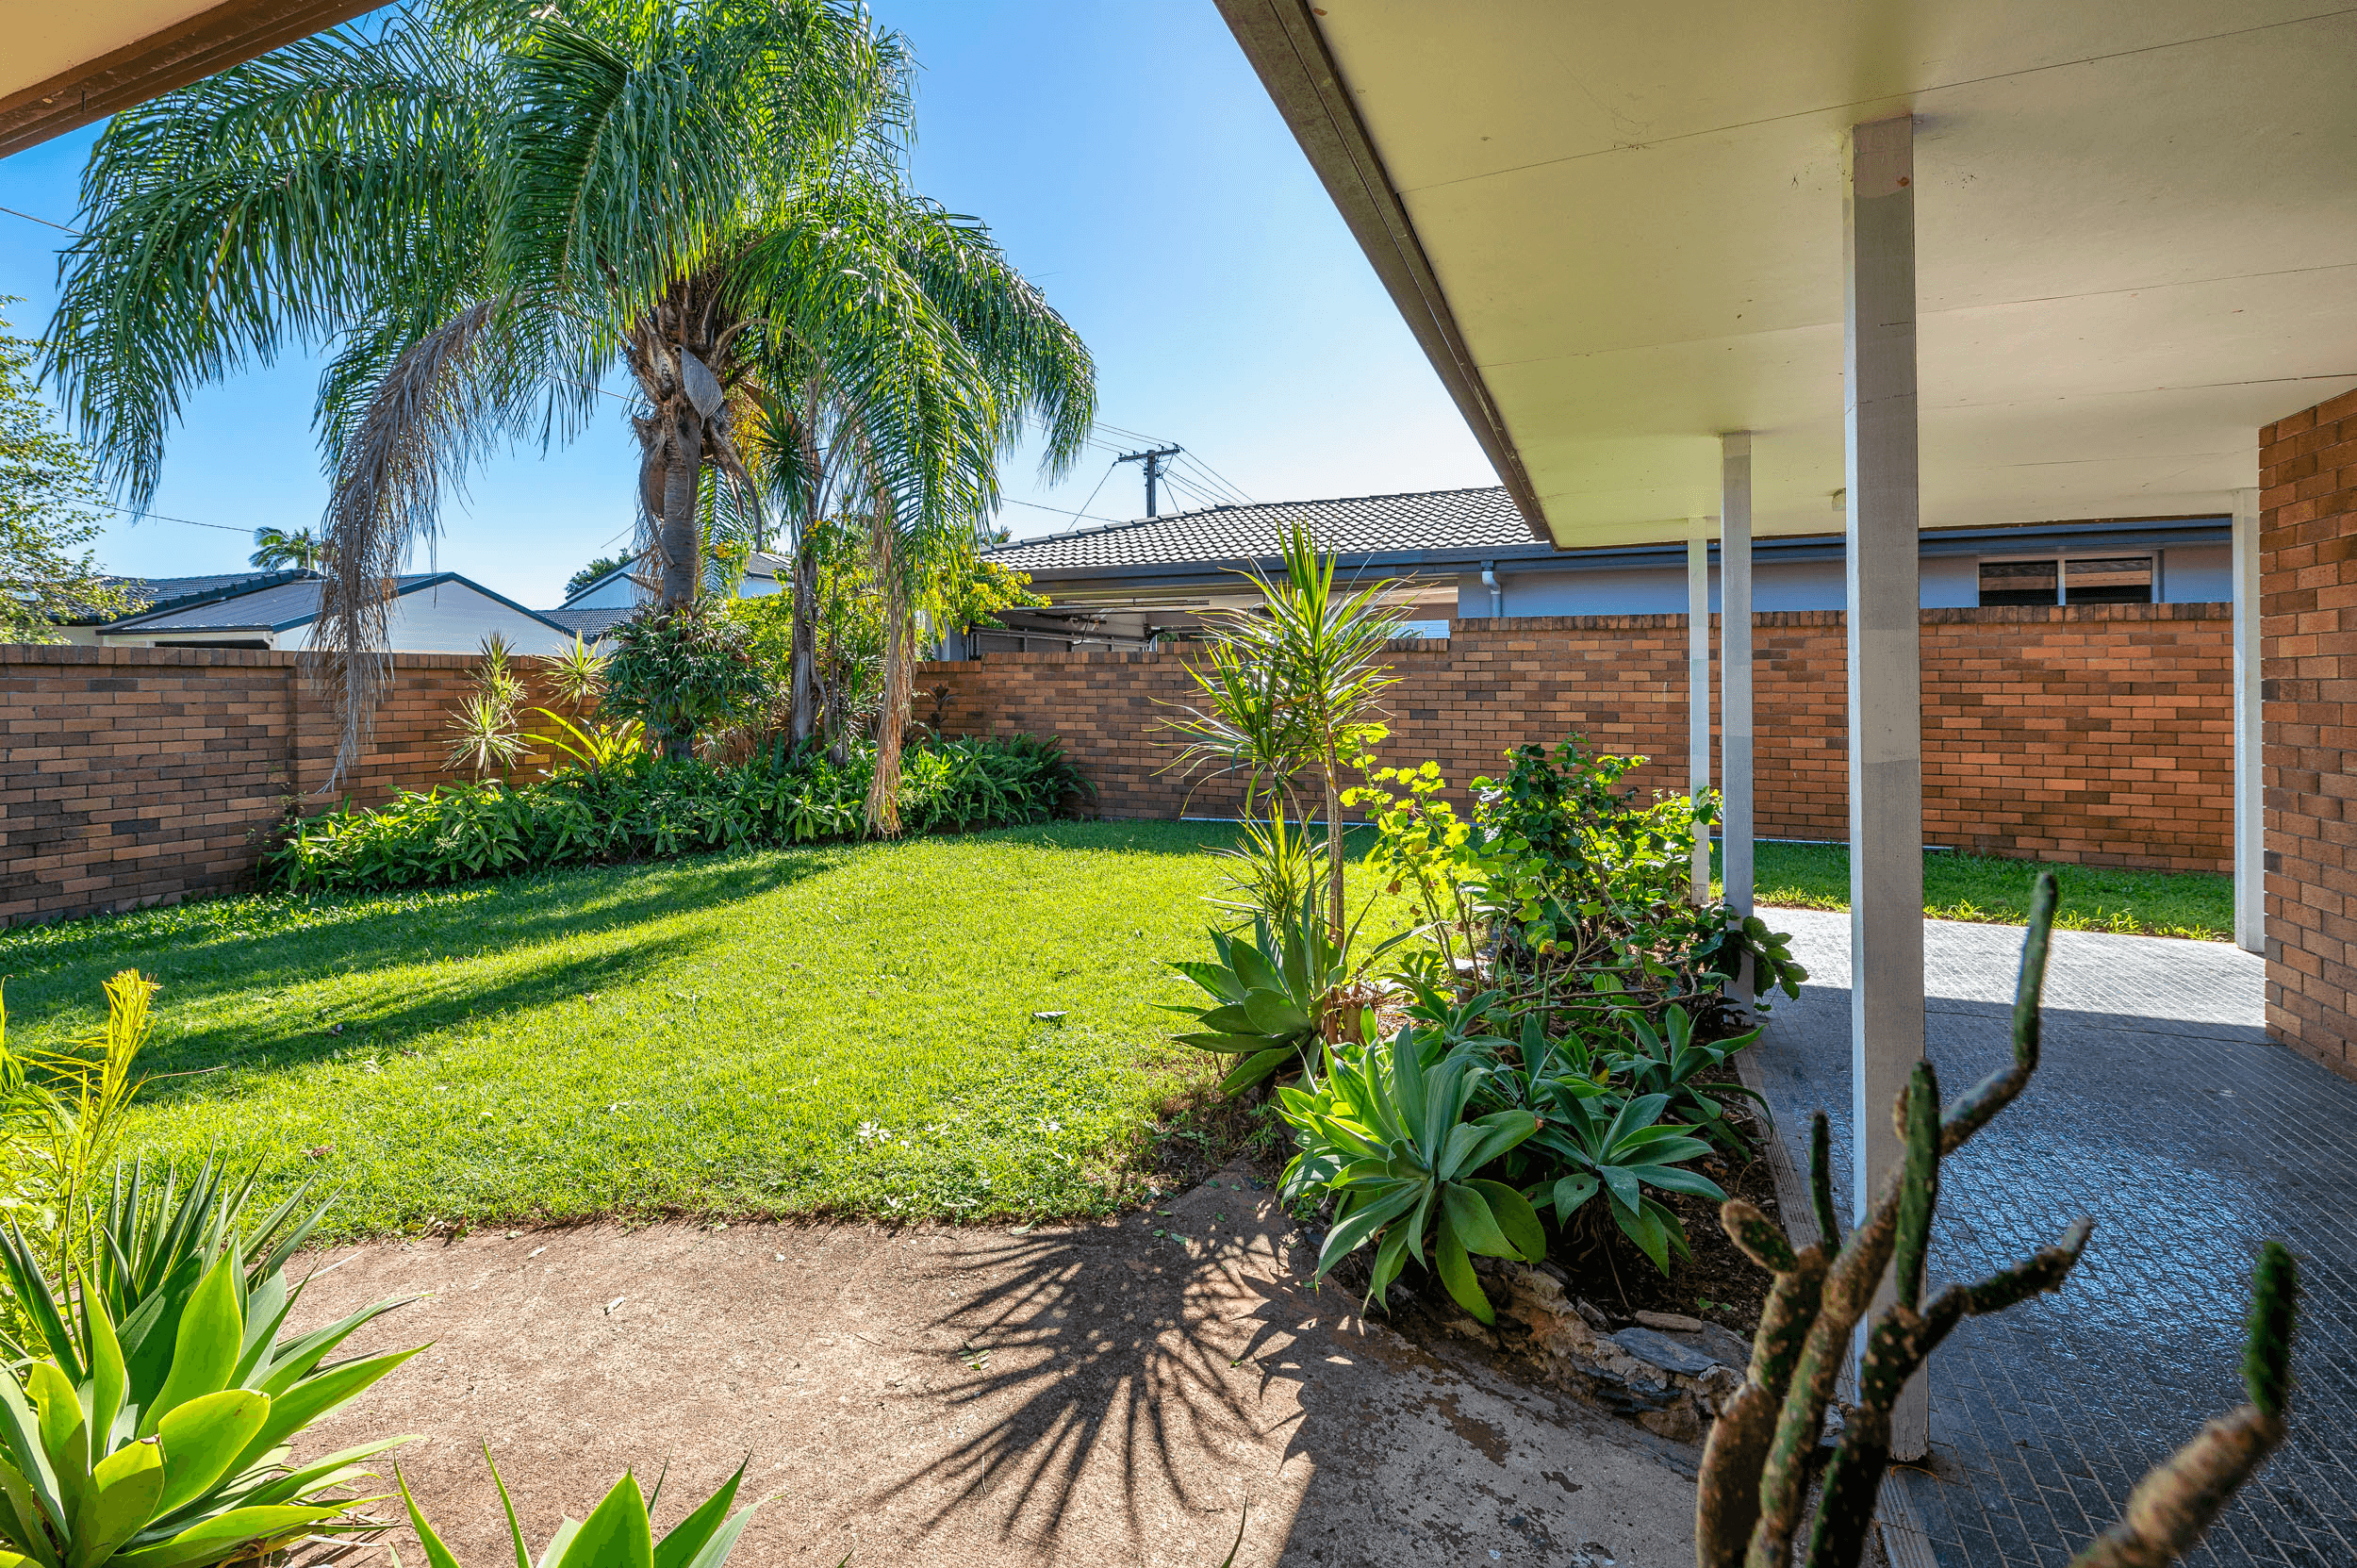 30 Kingfisher Crescent, BURLEIGH WATERS, QLD 4220